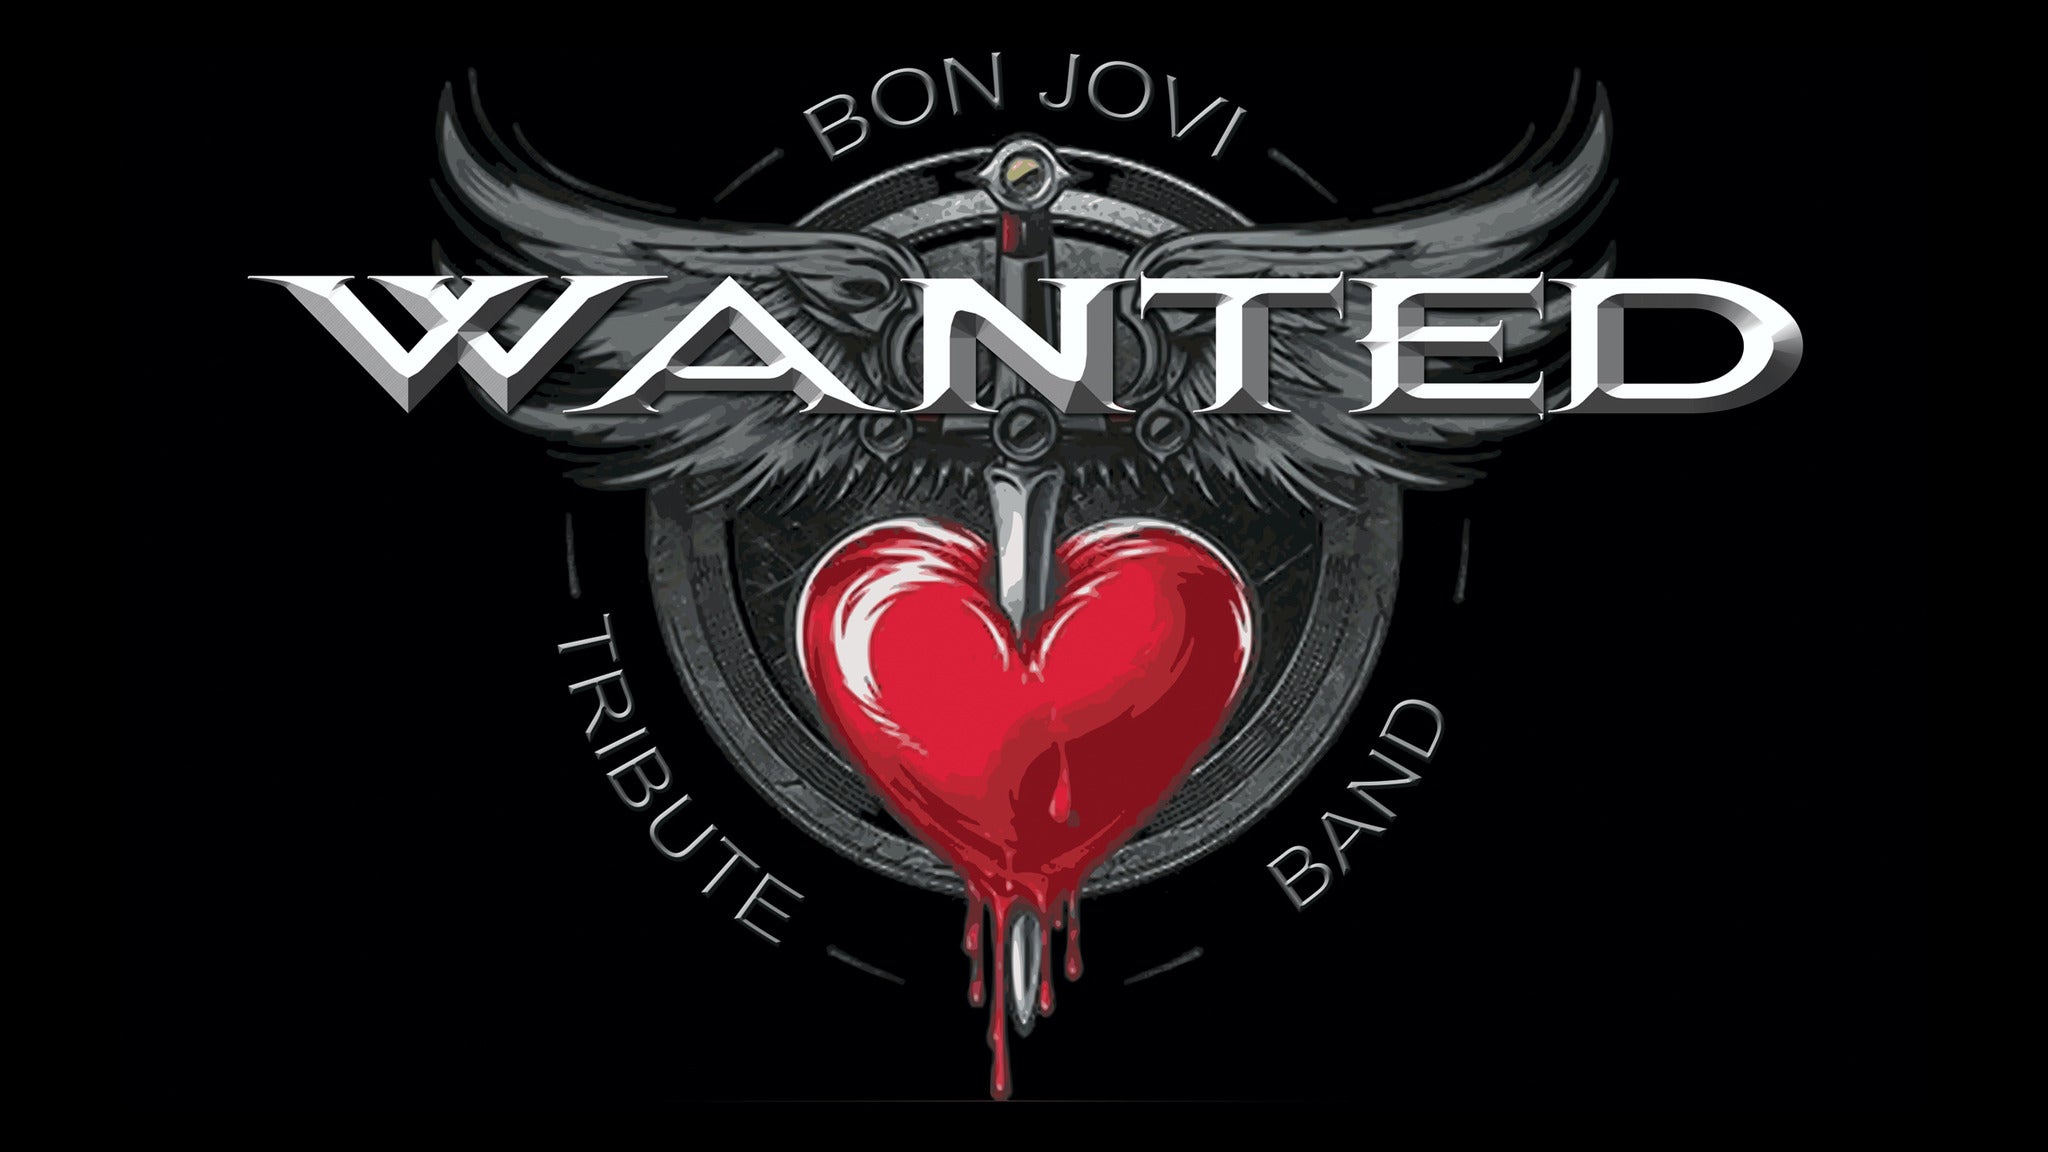 Wanted - Tribute To Bon Jovi presale code for real tickets in Cleveland